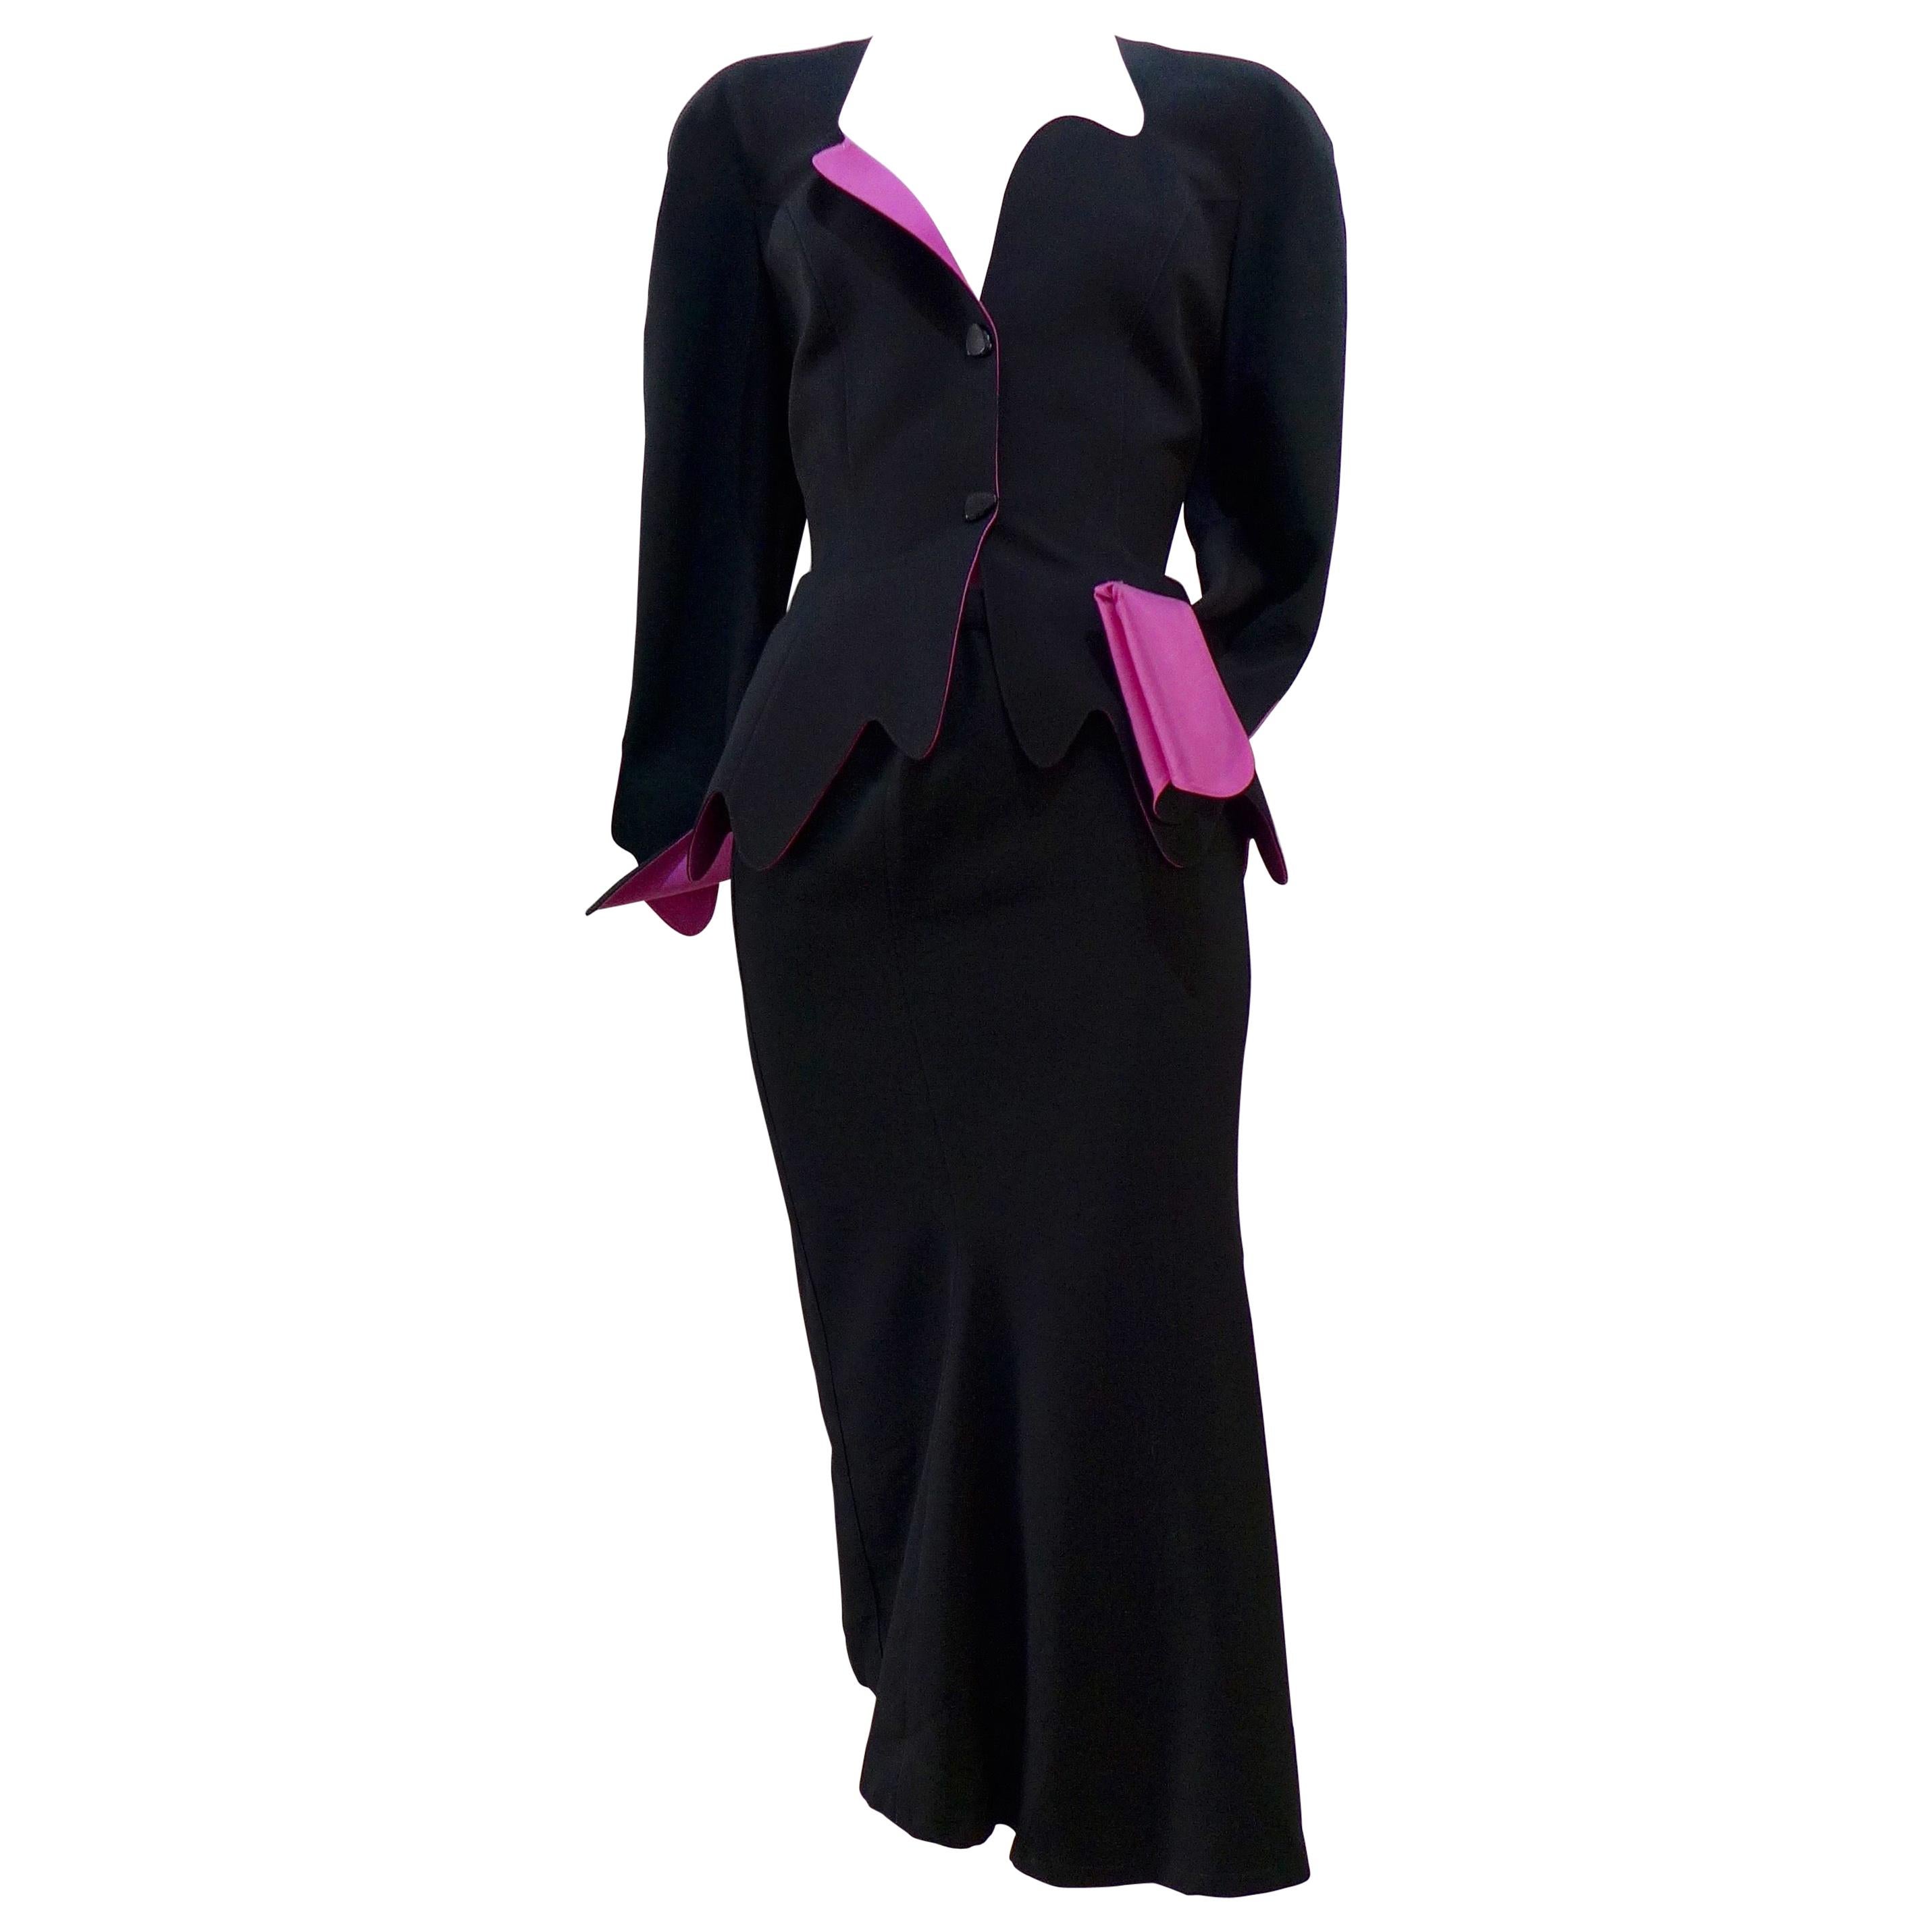 THIERRY MUGLER Black with Pink Lining and Cuff Skirt Suit Size 40